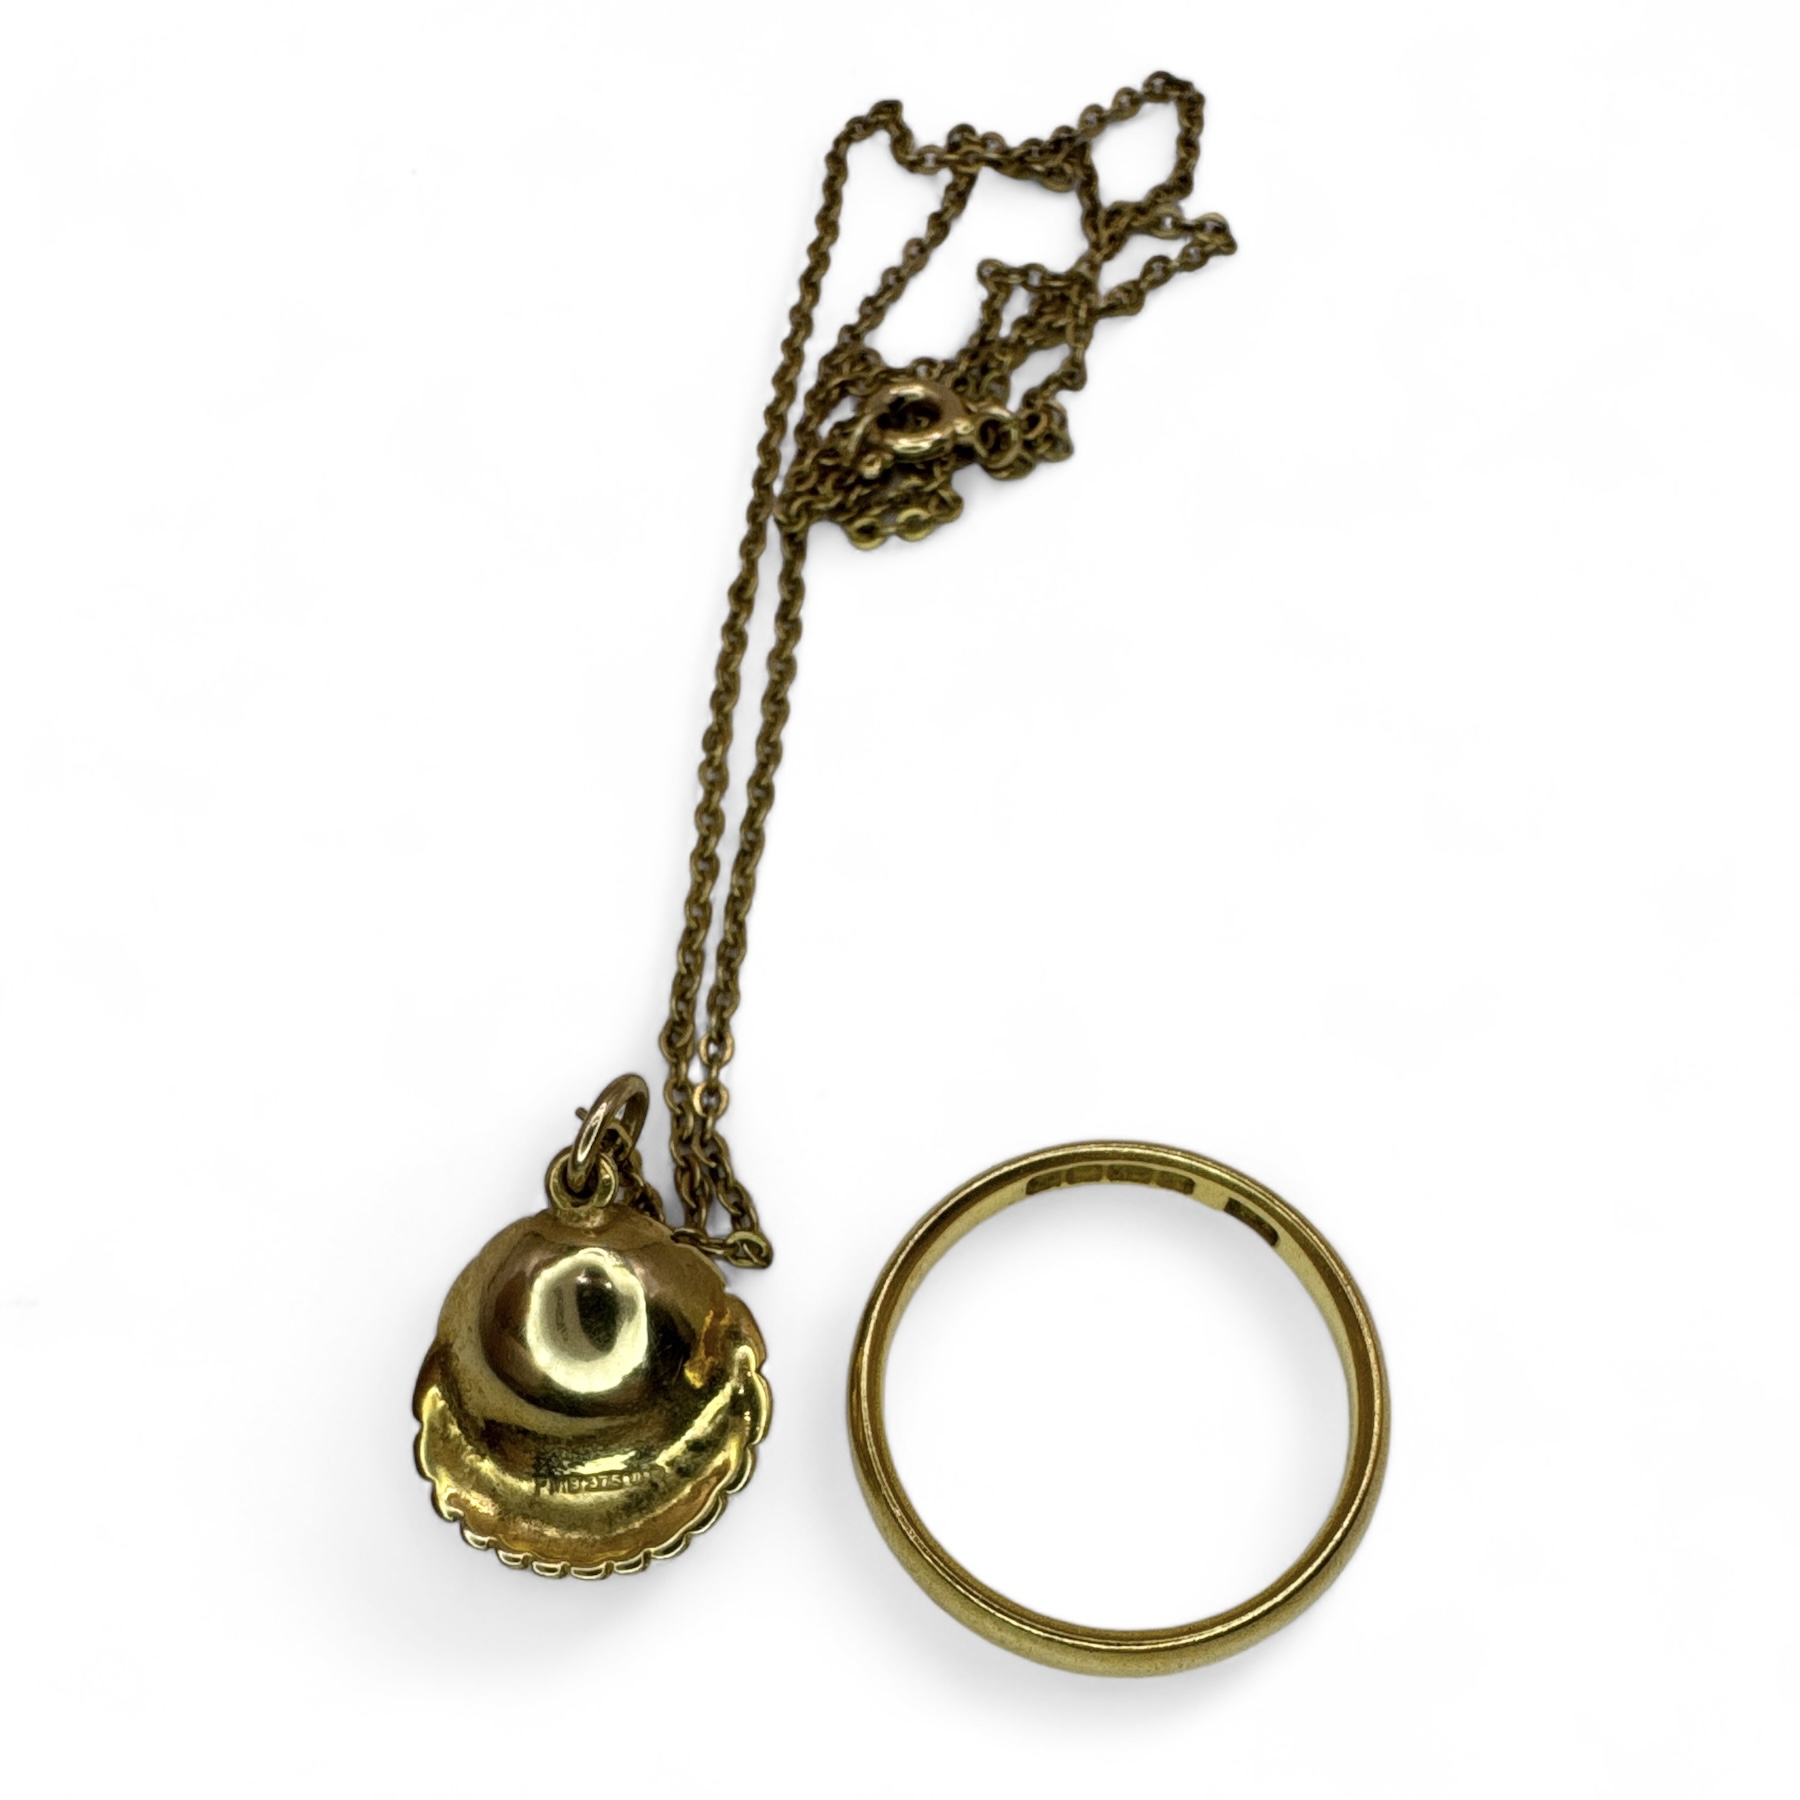 A 22ct gold band ring along with a cultured pearl set scallop shell pendant in 9ct gold on a 9ct - Image 2 of 2